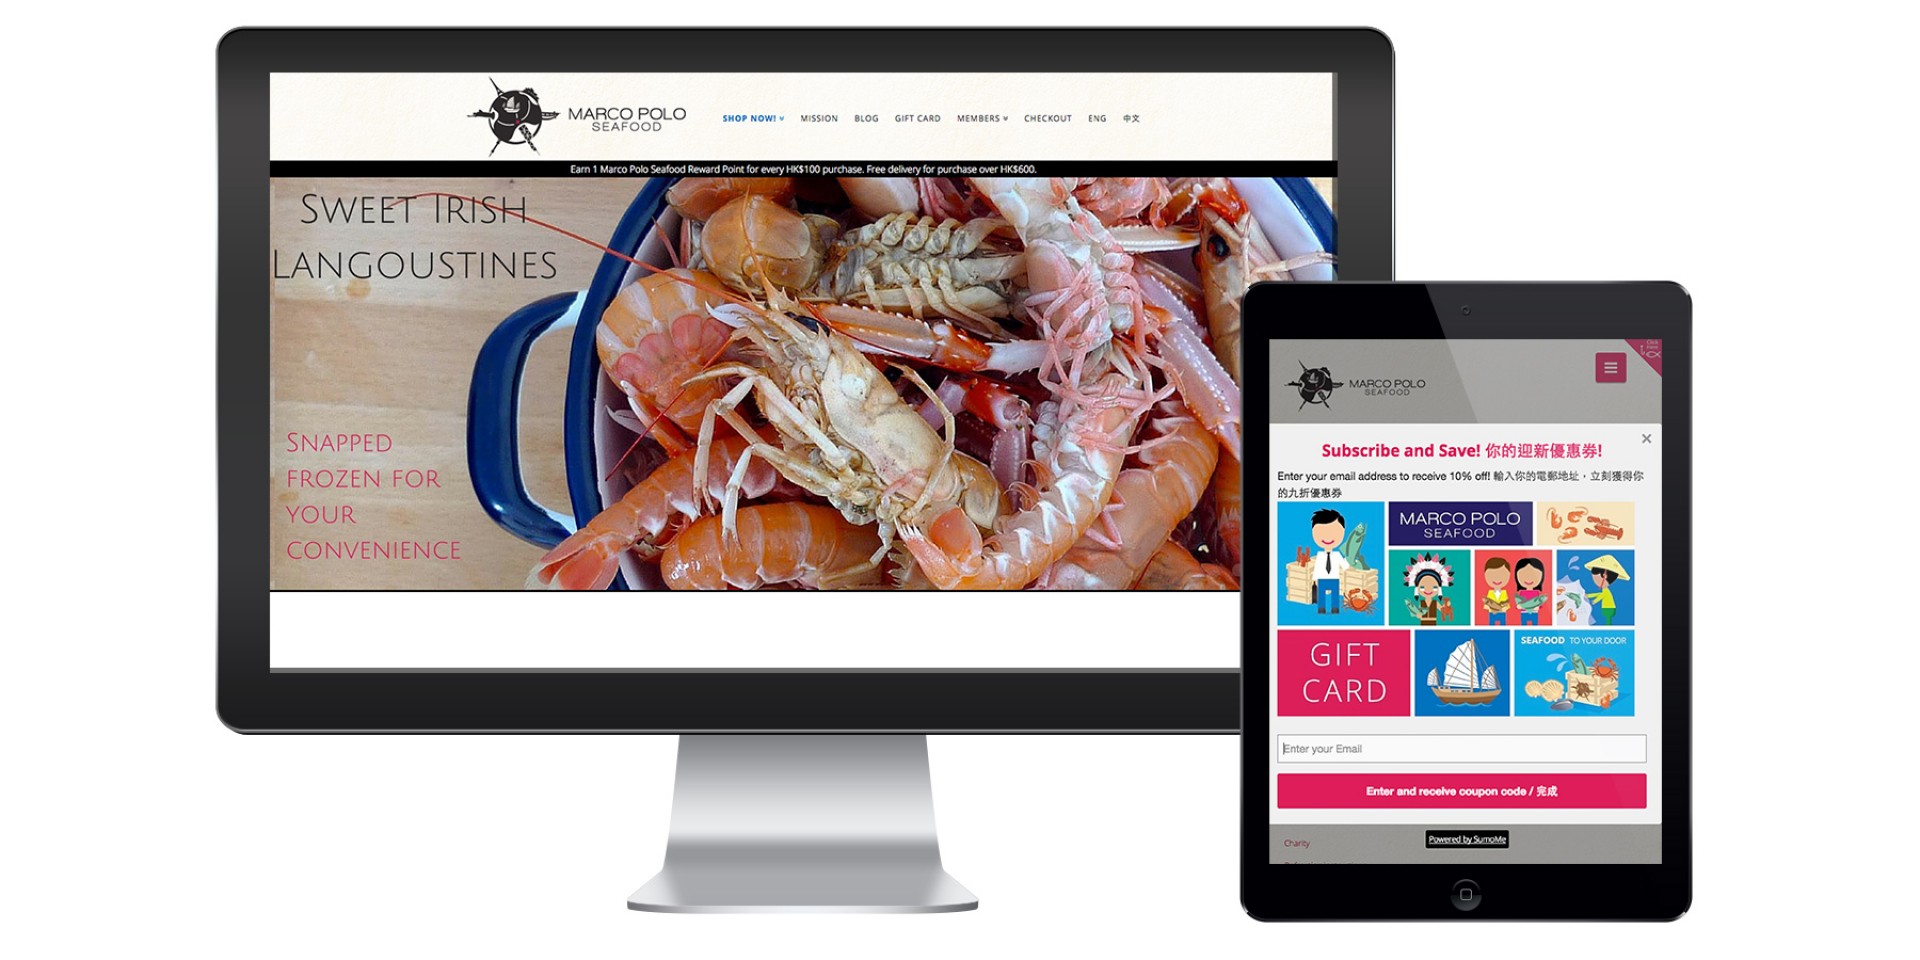 Marco Polo Seafood Responsive Website Design